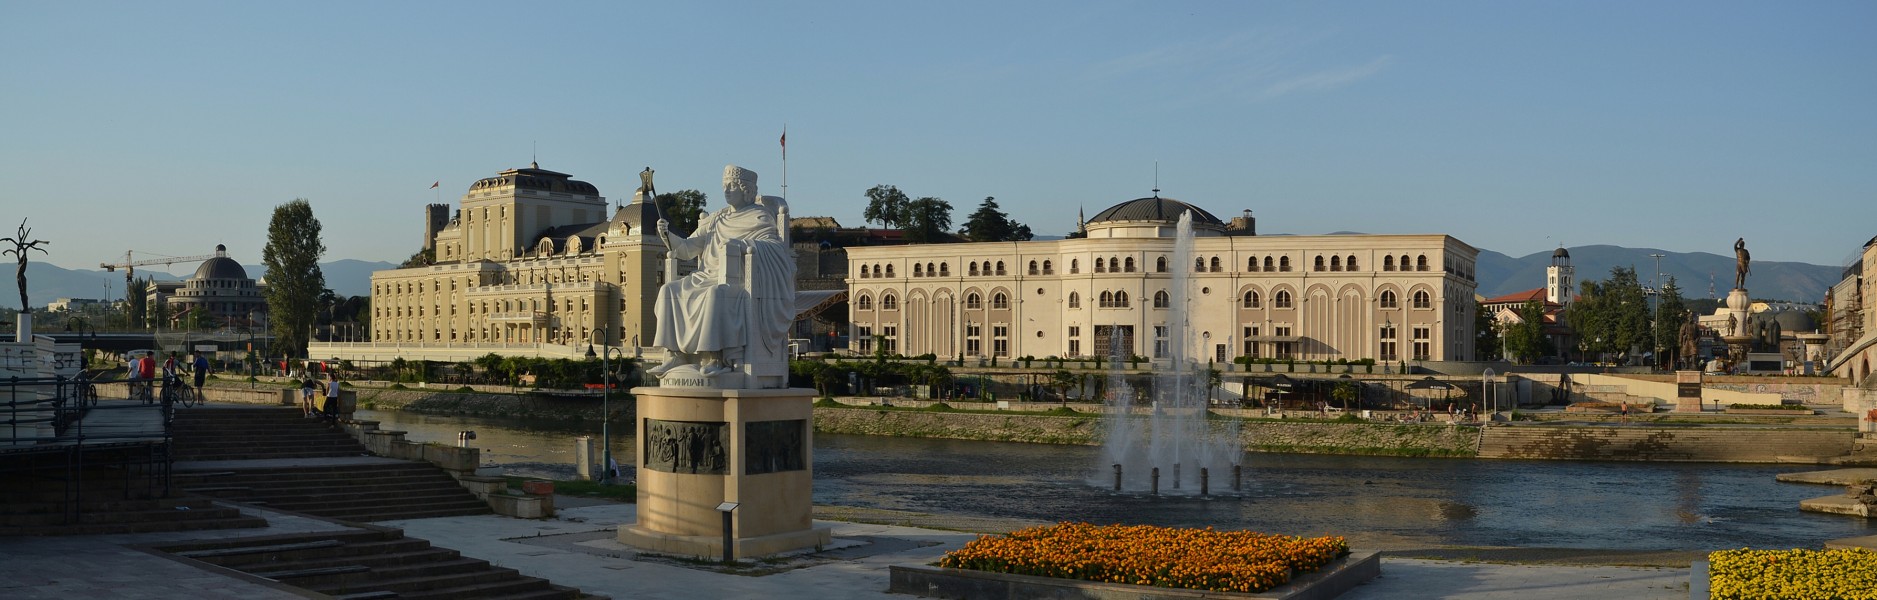 Skopje 2014 - Museum of the Macedonian Struggle and National Theatre